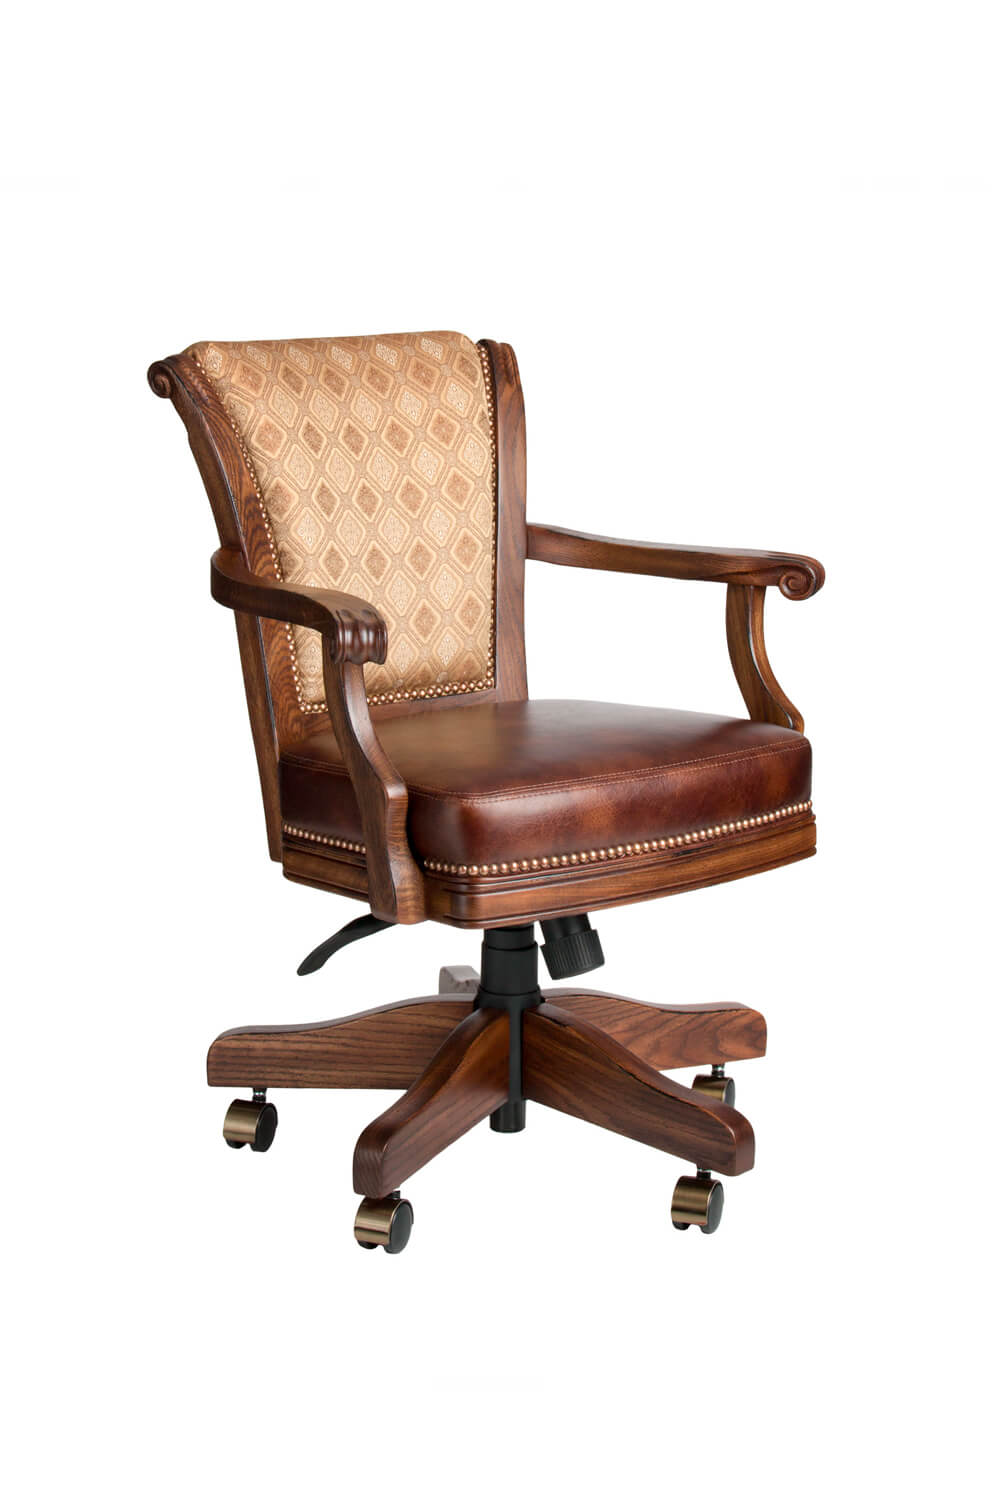 Tufted Brown Leather Adjustable Executive Office Chair- Casters